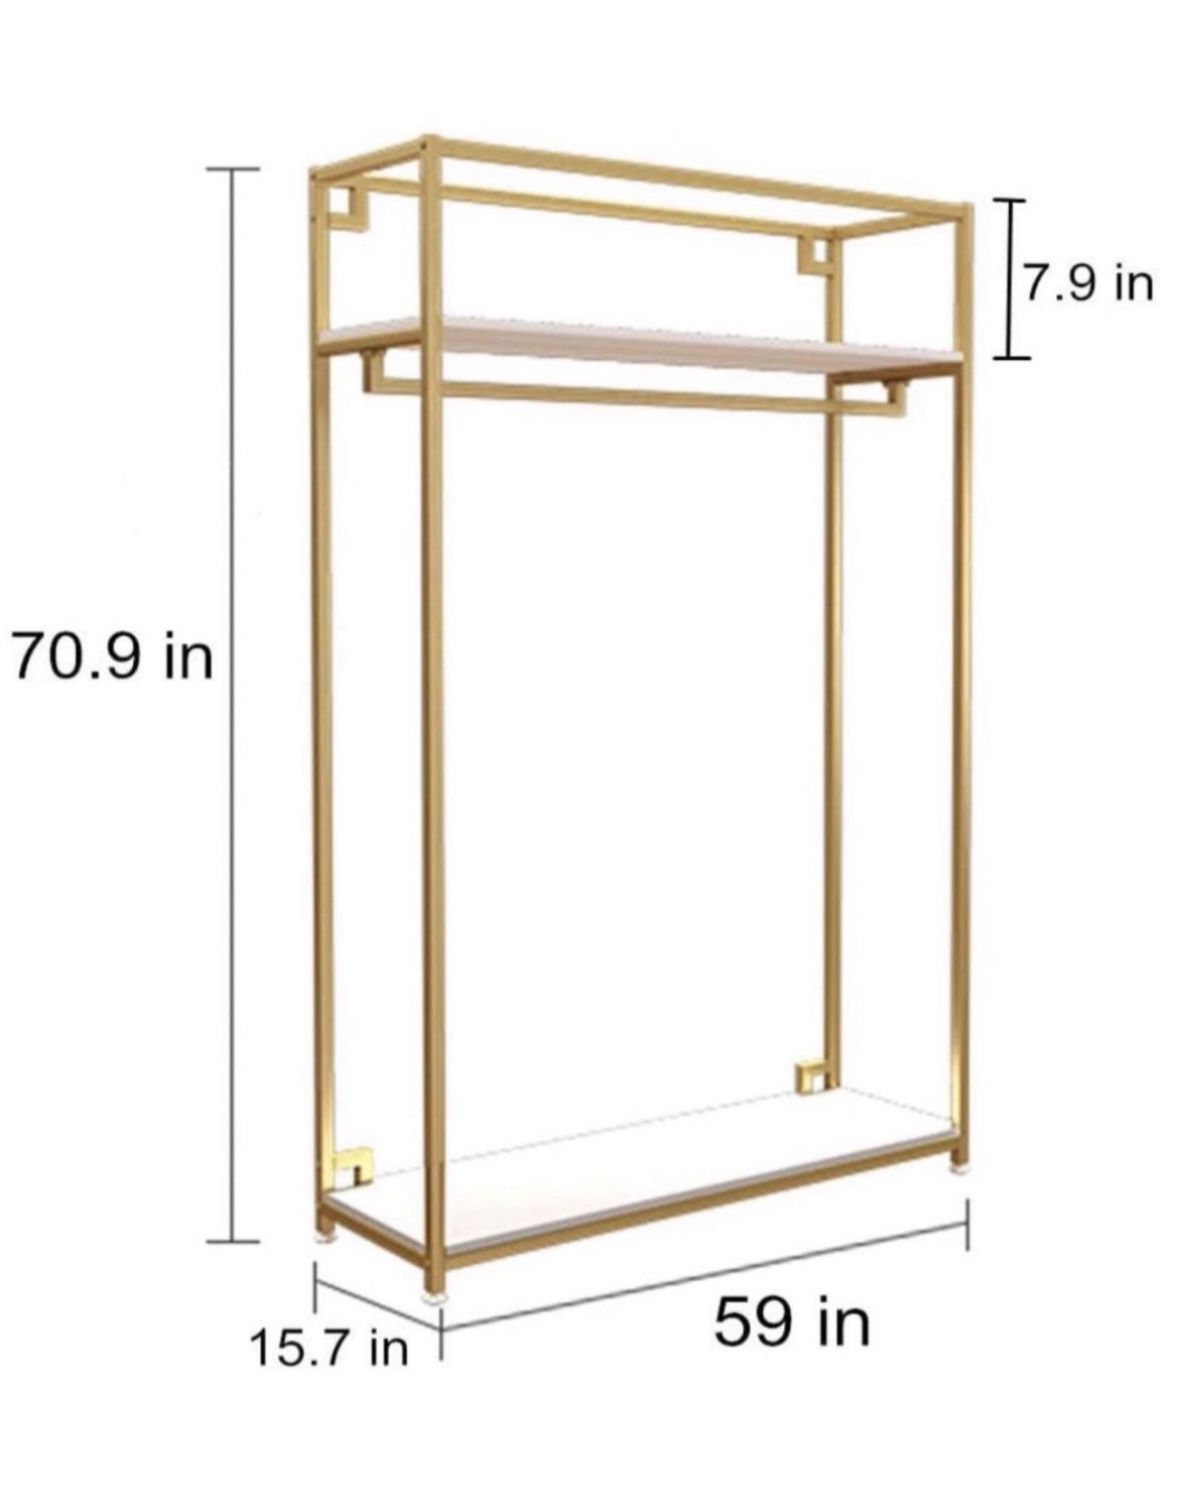 Metal Clothing Display Rack Standing Garment Clothing Rack with Wooden Shelves